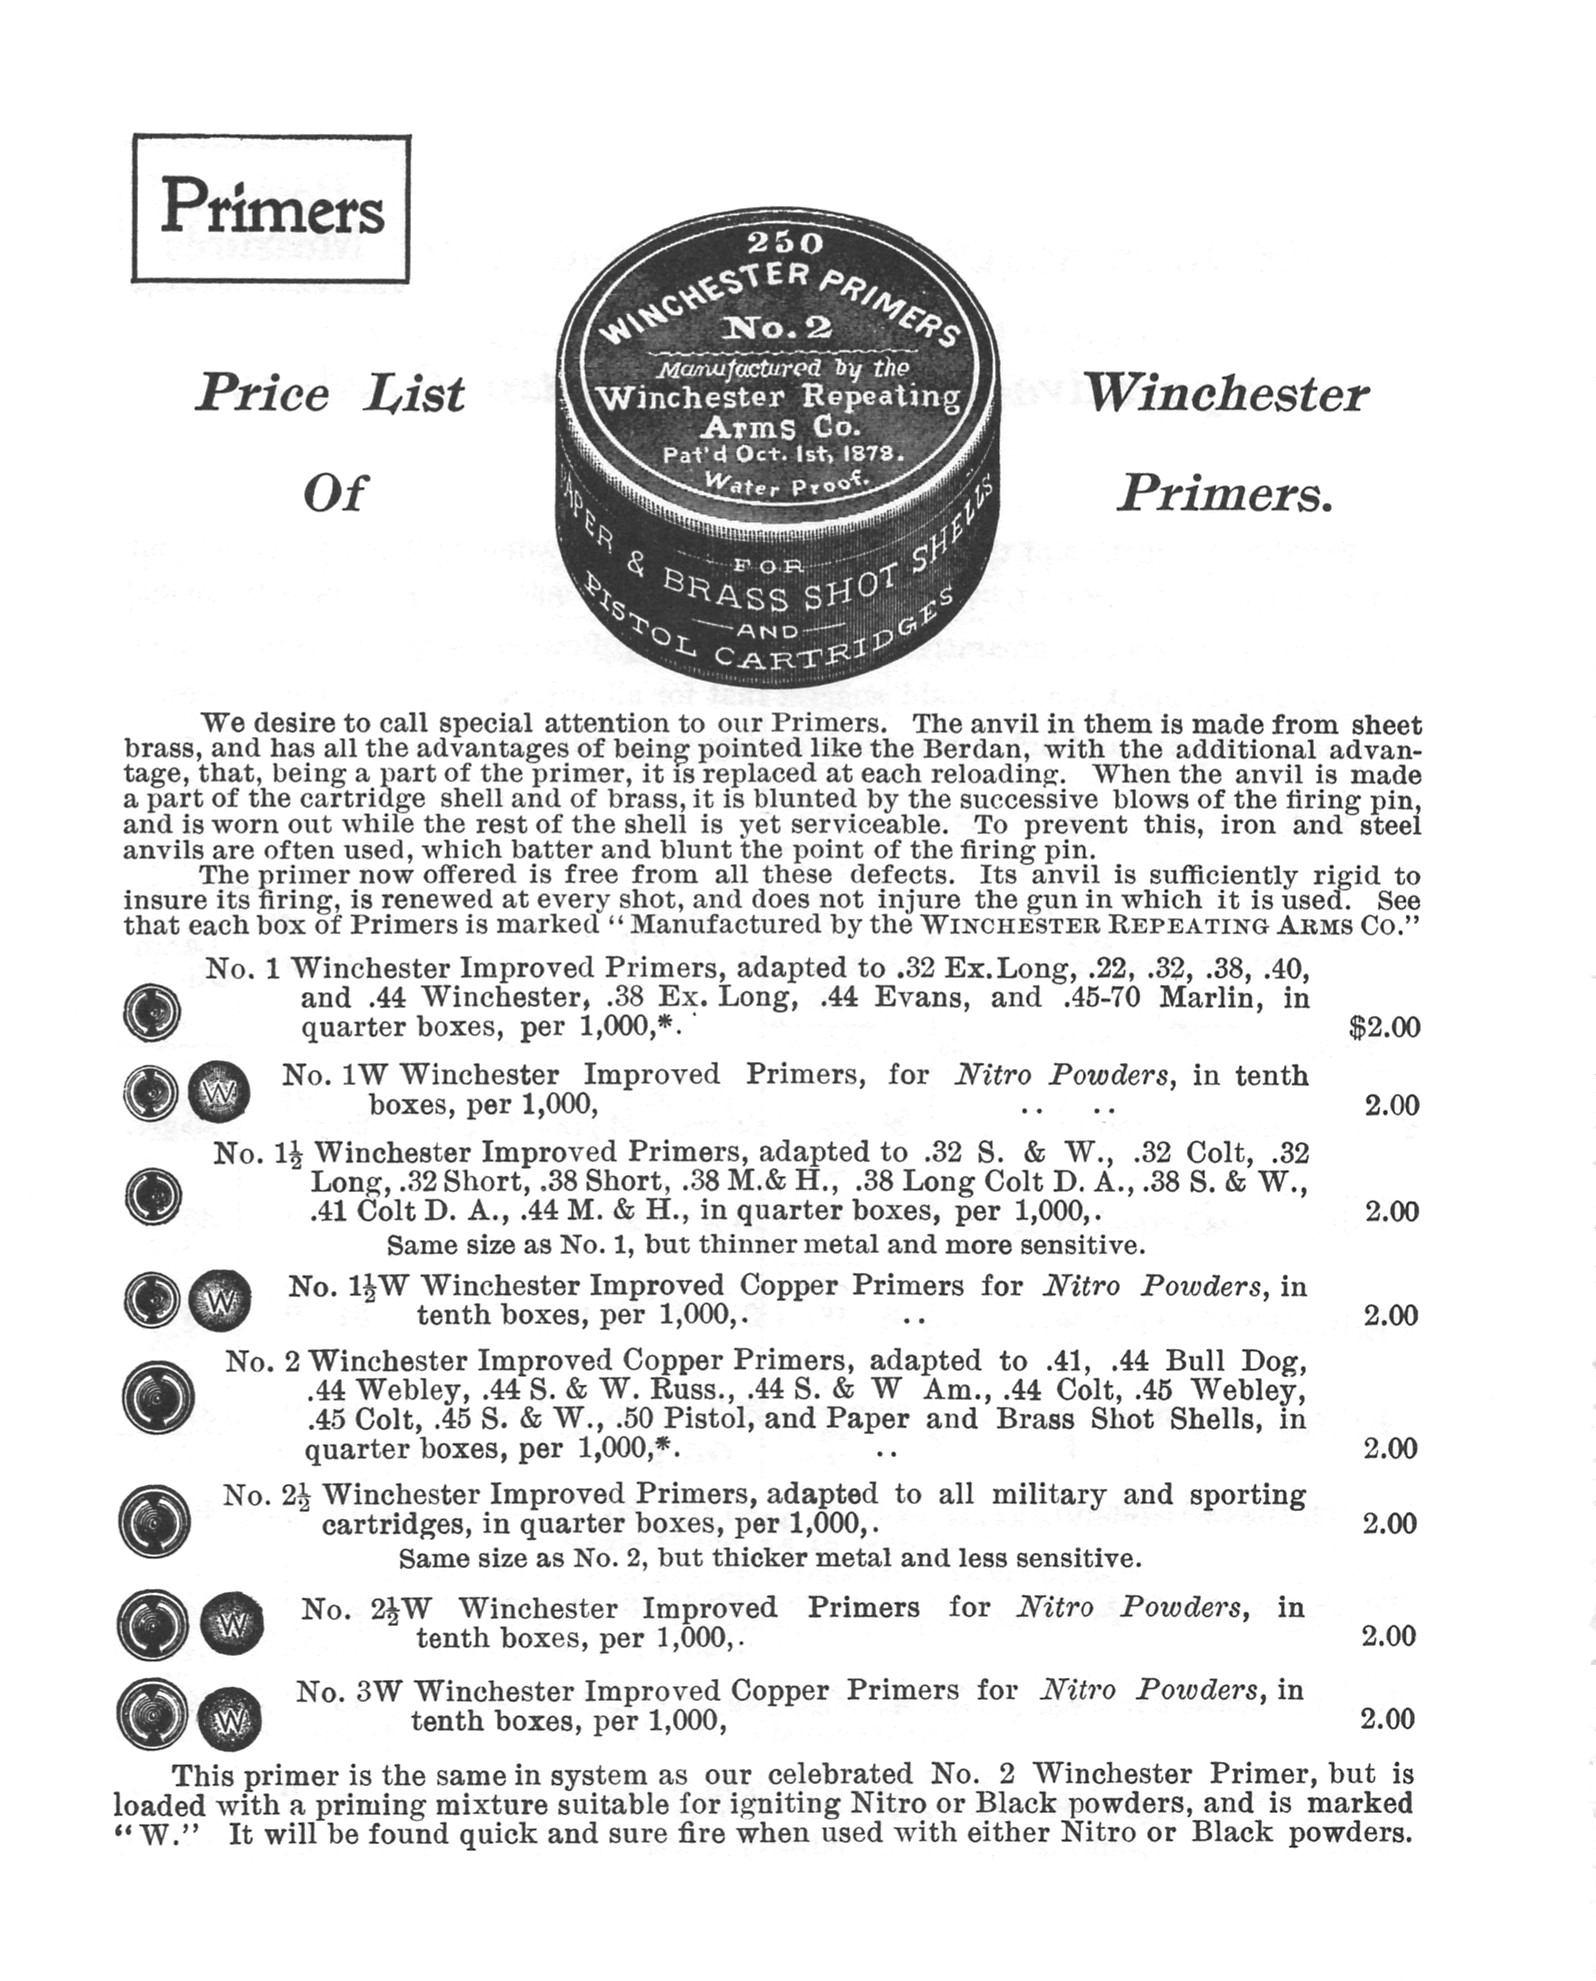 Advertisement from the 1899 Winchester catalog for primers. Note the “W” series primers are recommended for nitro powders.